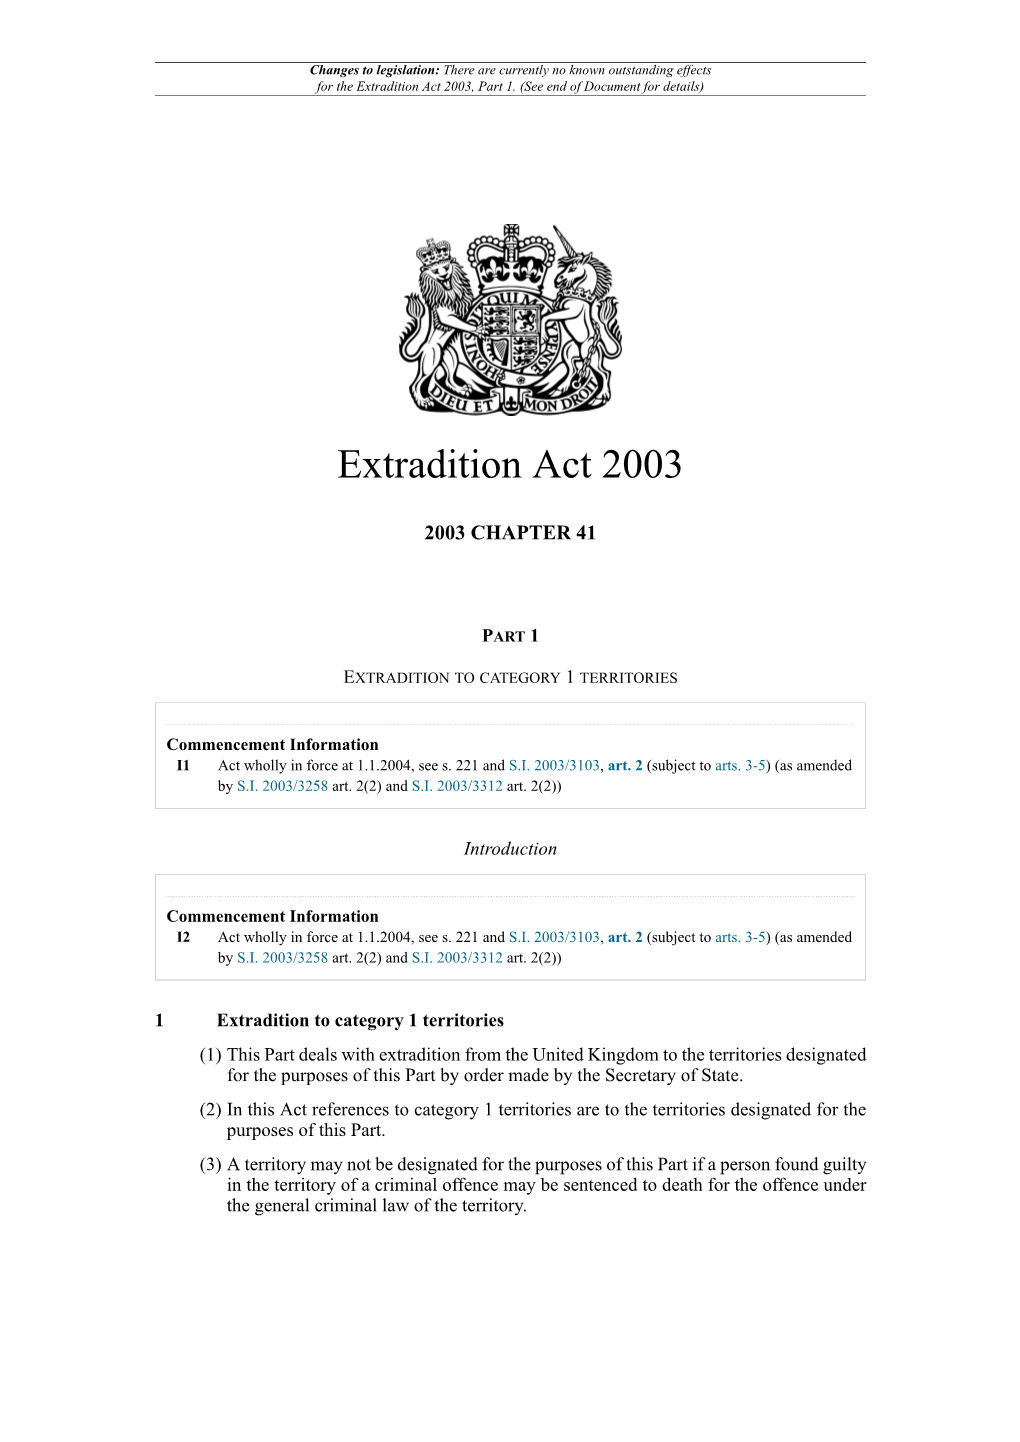 Extradition Act 2003, Part 1